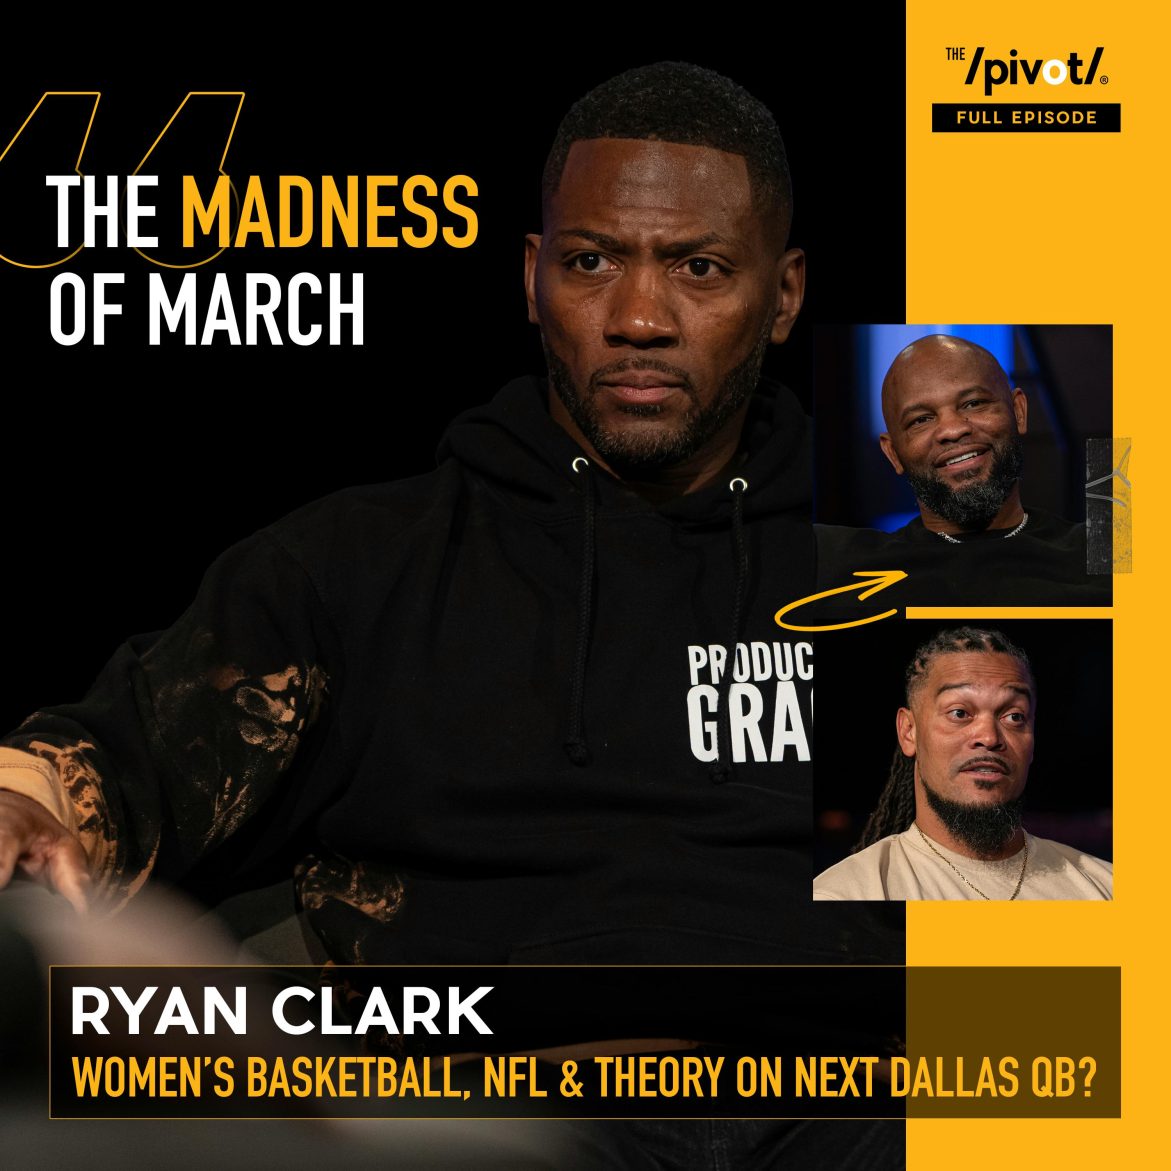 Black Podcasting - Ryan Clark, Fred Taylor & Channing Crowder talk on The Pivot: Madness of March, NFL Off-season, Deion Sanders' comments, theory on next Quarterback in Dallas, Protecting your kids, learning Grace and being disciplined